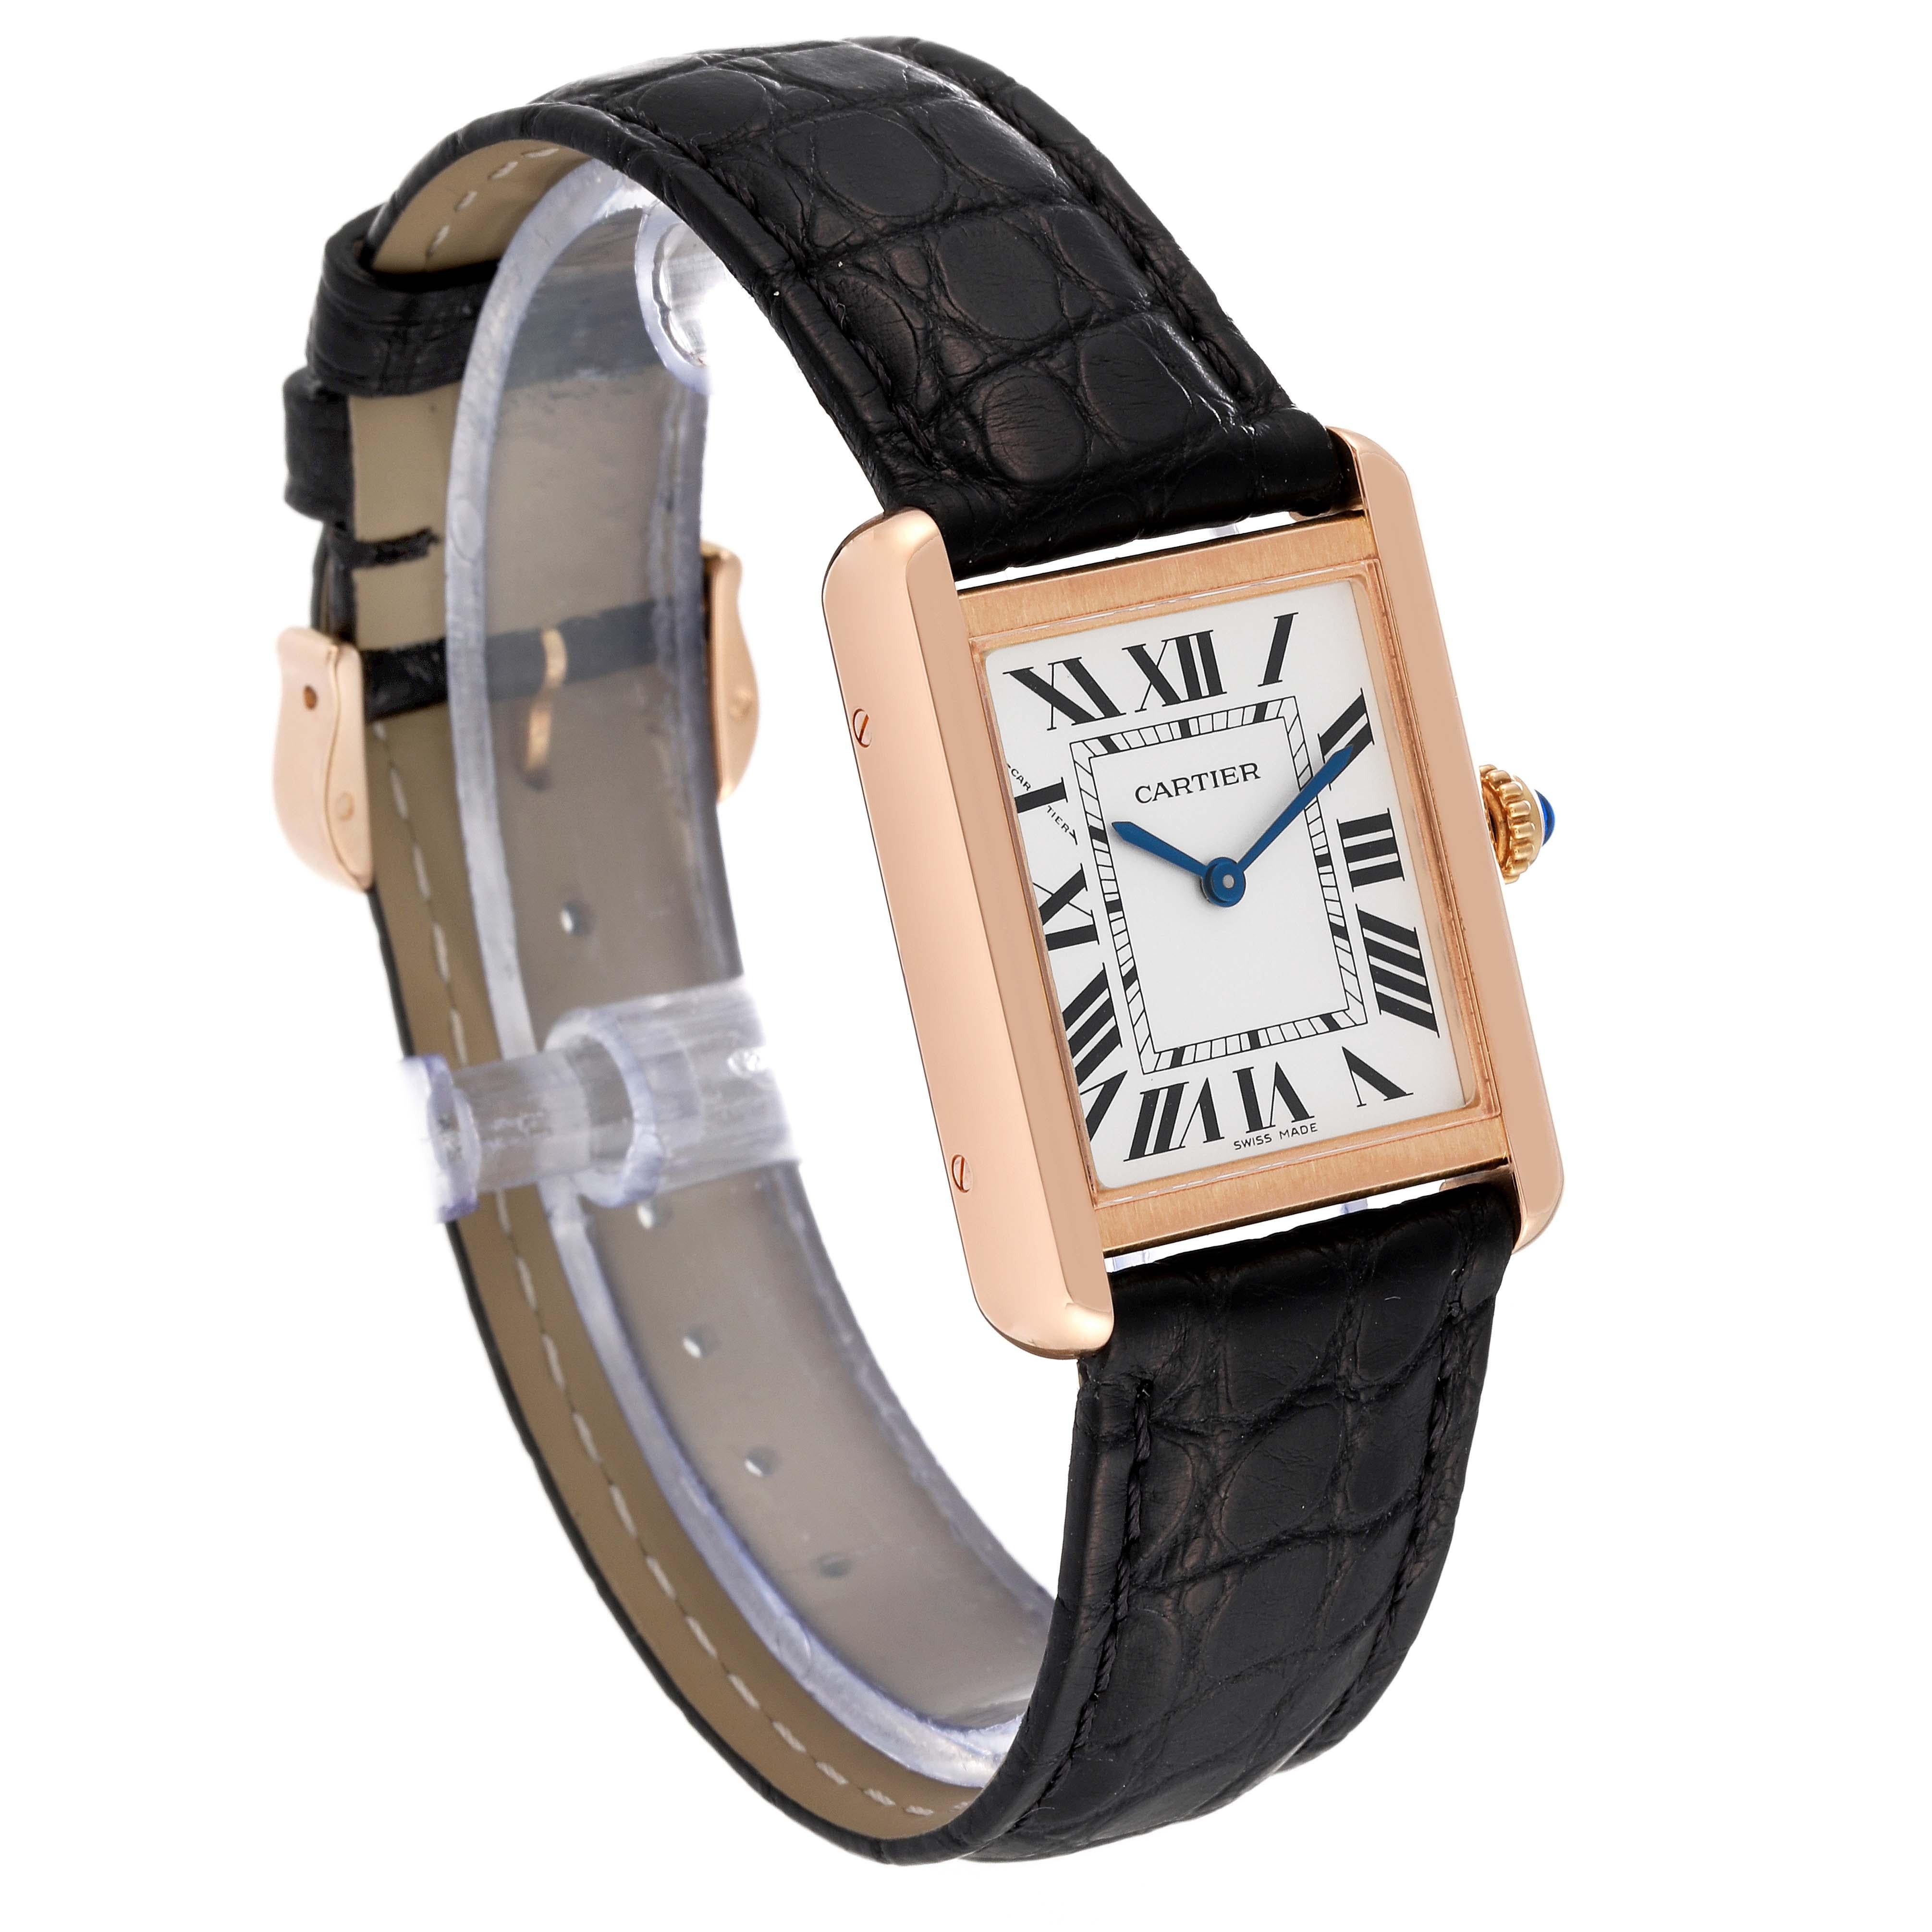 Cartier Tank Solo Silver Dial Rose Gold Steel Ladies Watch W5200024. Quartz movement. 18k rose gold 30.0 x 24.4 mm case with stainless steel caseback. Circular grained crown set with the blue spinel cabochon. . Scratch resistant sapphire crystal.